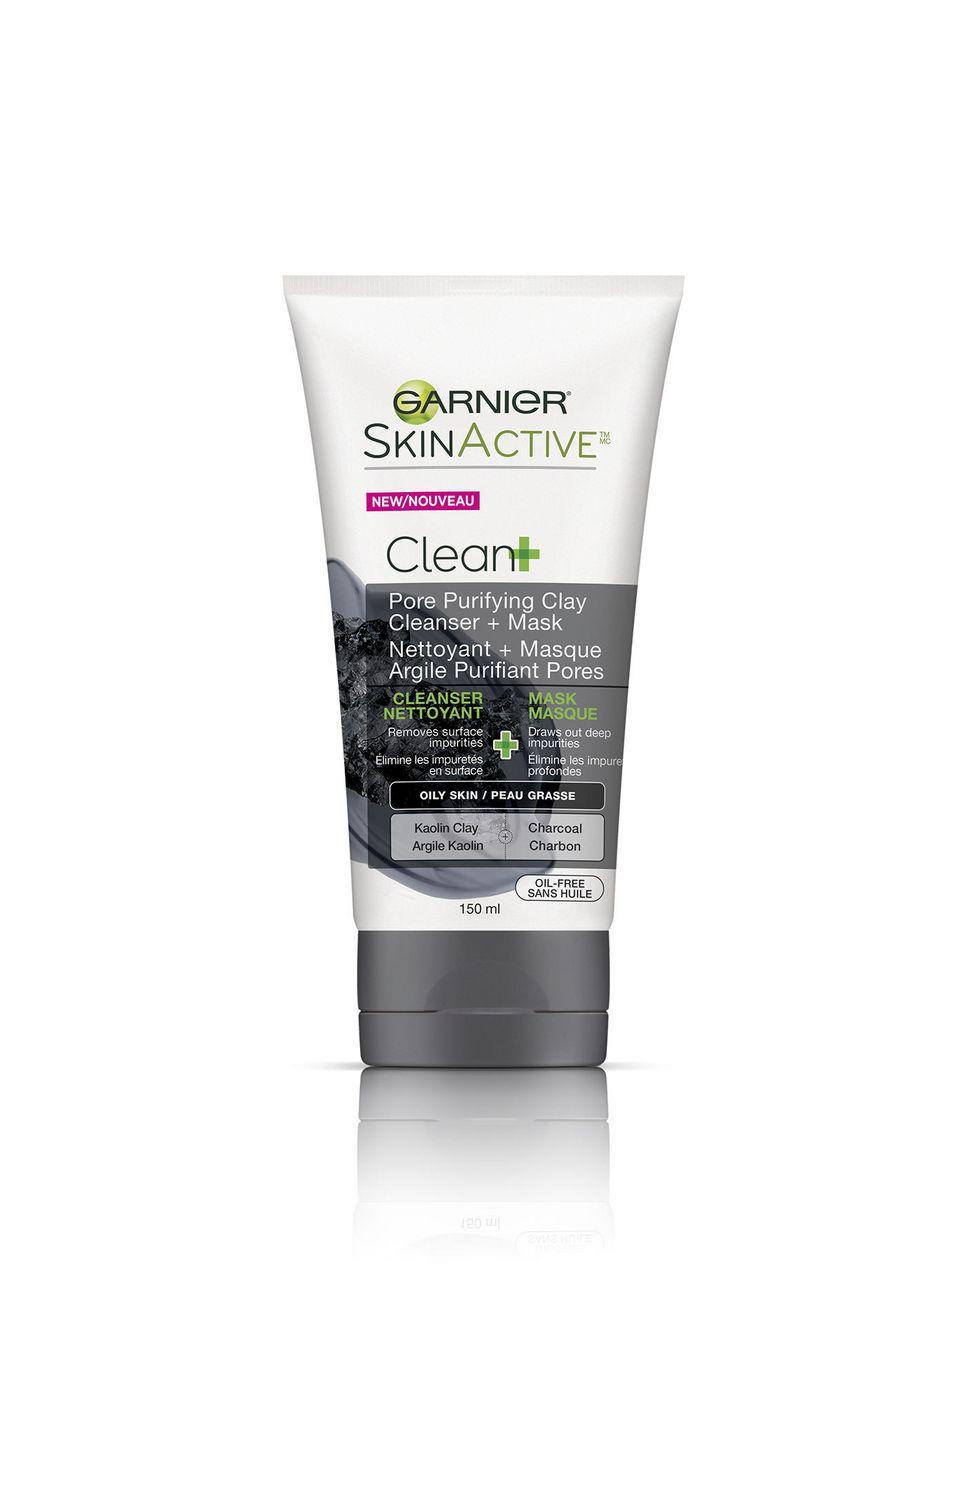 SkinActive Clean + Pore Purifying Clay Cleanser Mask